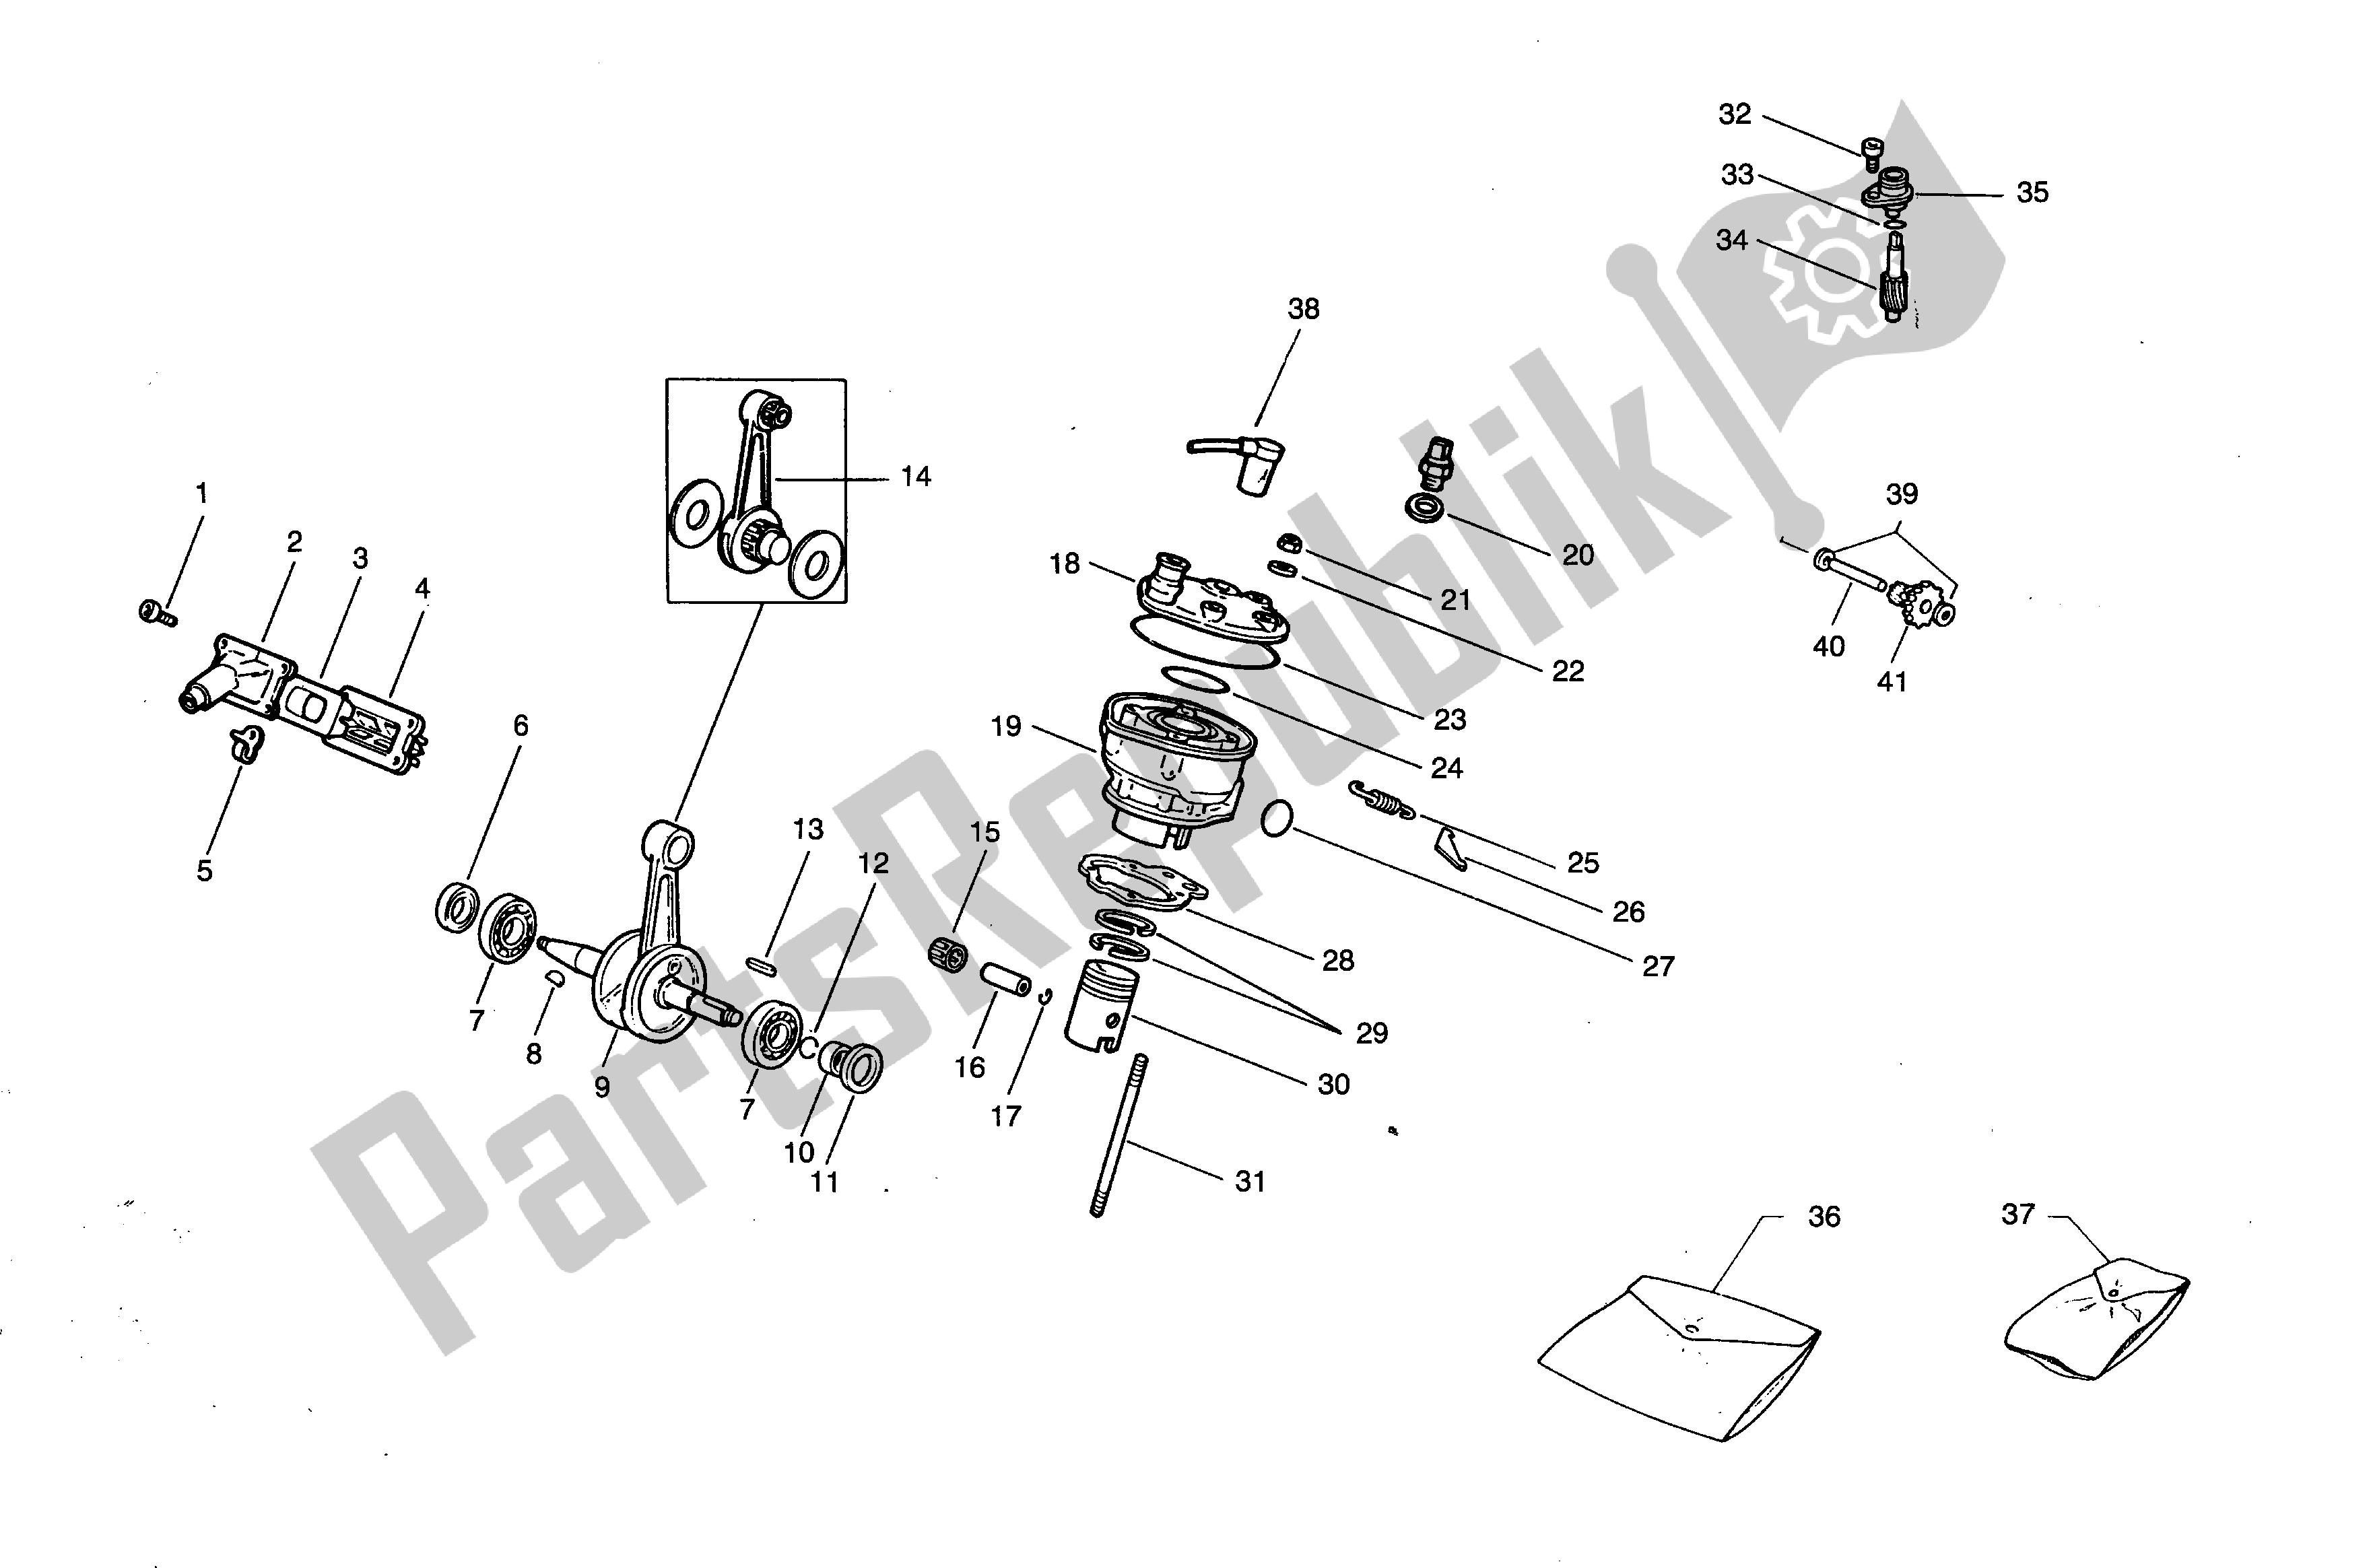 All parts for the Cylinder - Cylinder Head - Round Crankshaft - Piston of the Aprilia RS 50 1996 - 1998